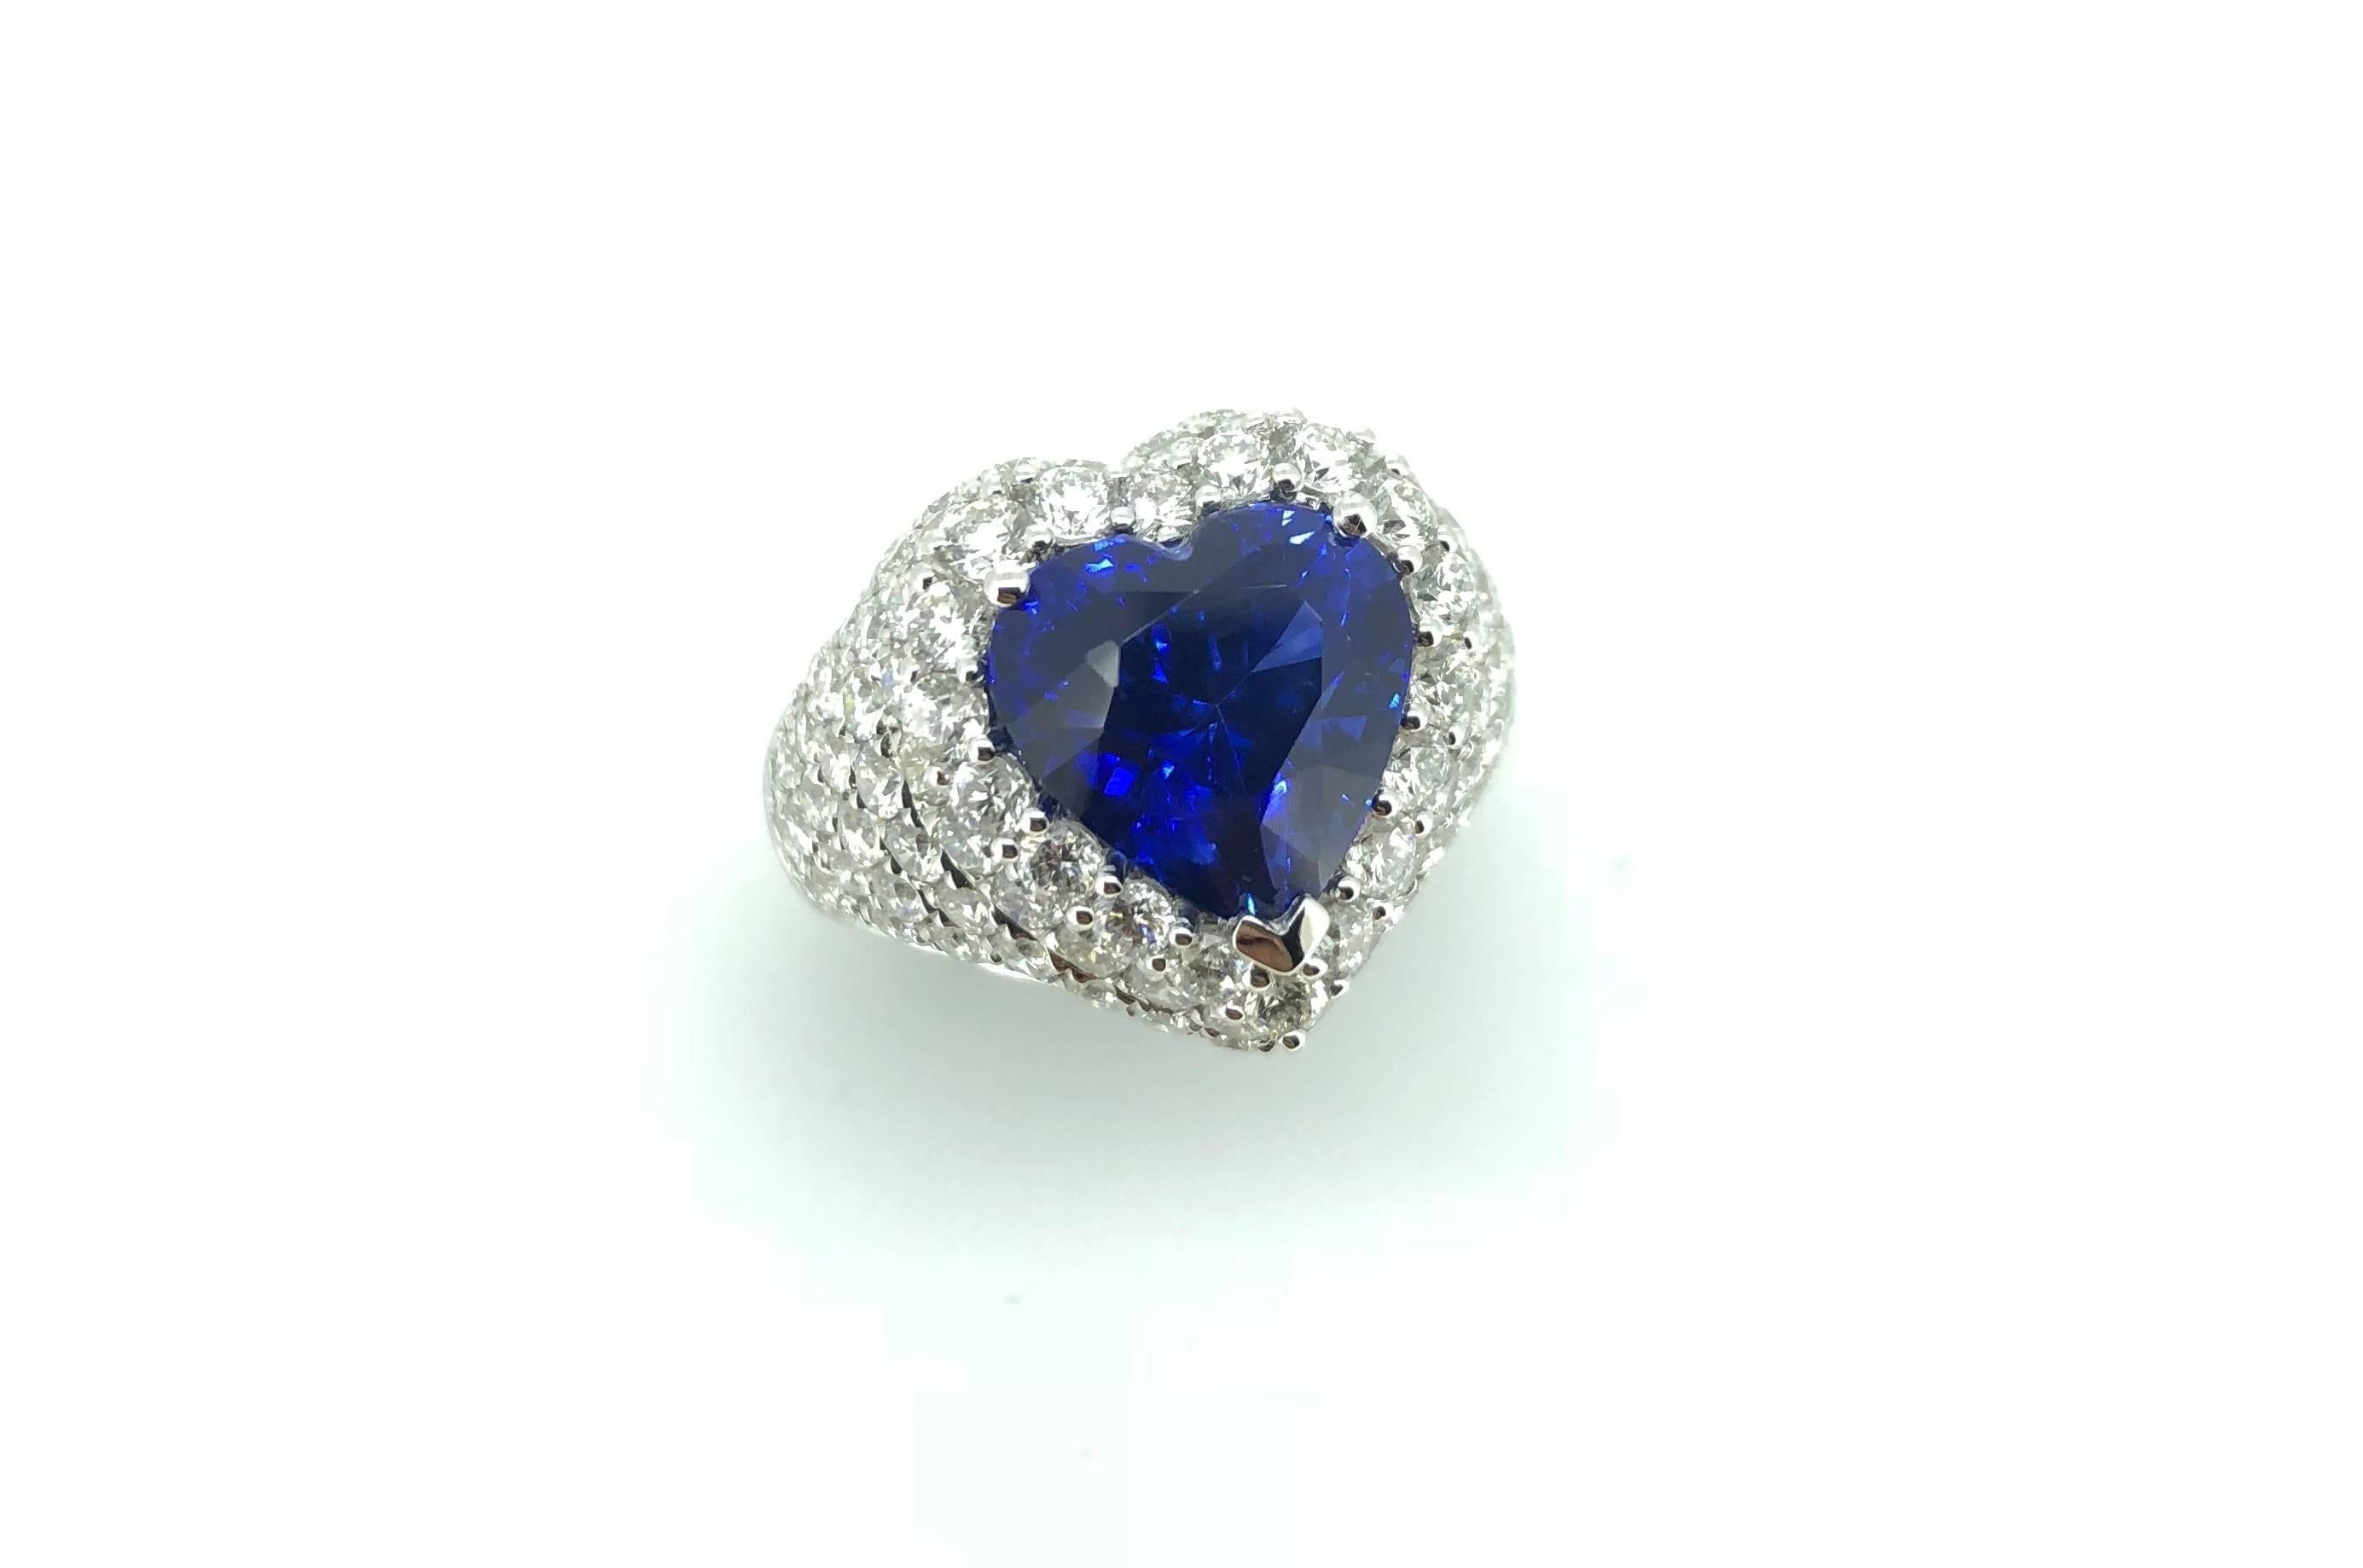 A Royal Blue Heart Shape 6.42 Carats Blue Sapphire Diamond Cocktail Party Dress Ring. Mounted in 18K White Gold and Diamonds. 

Certified By Gem Research Swisslab (GRS). The stunning Royal Blue colour-grade Natural Sapphire is Heated only.  

The